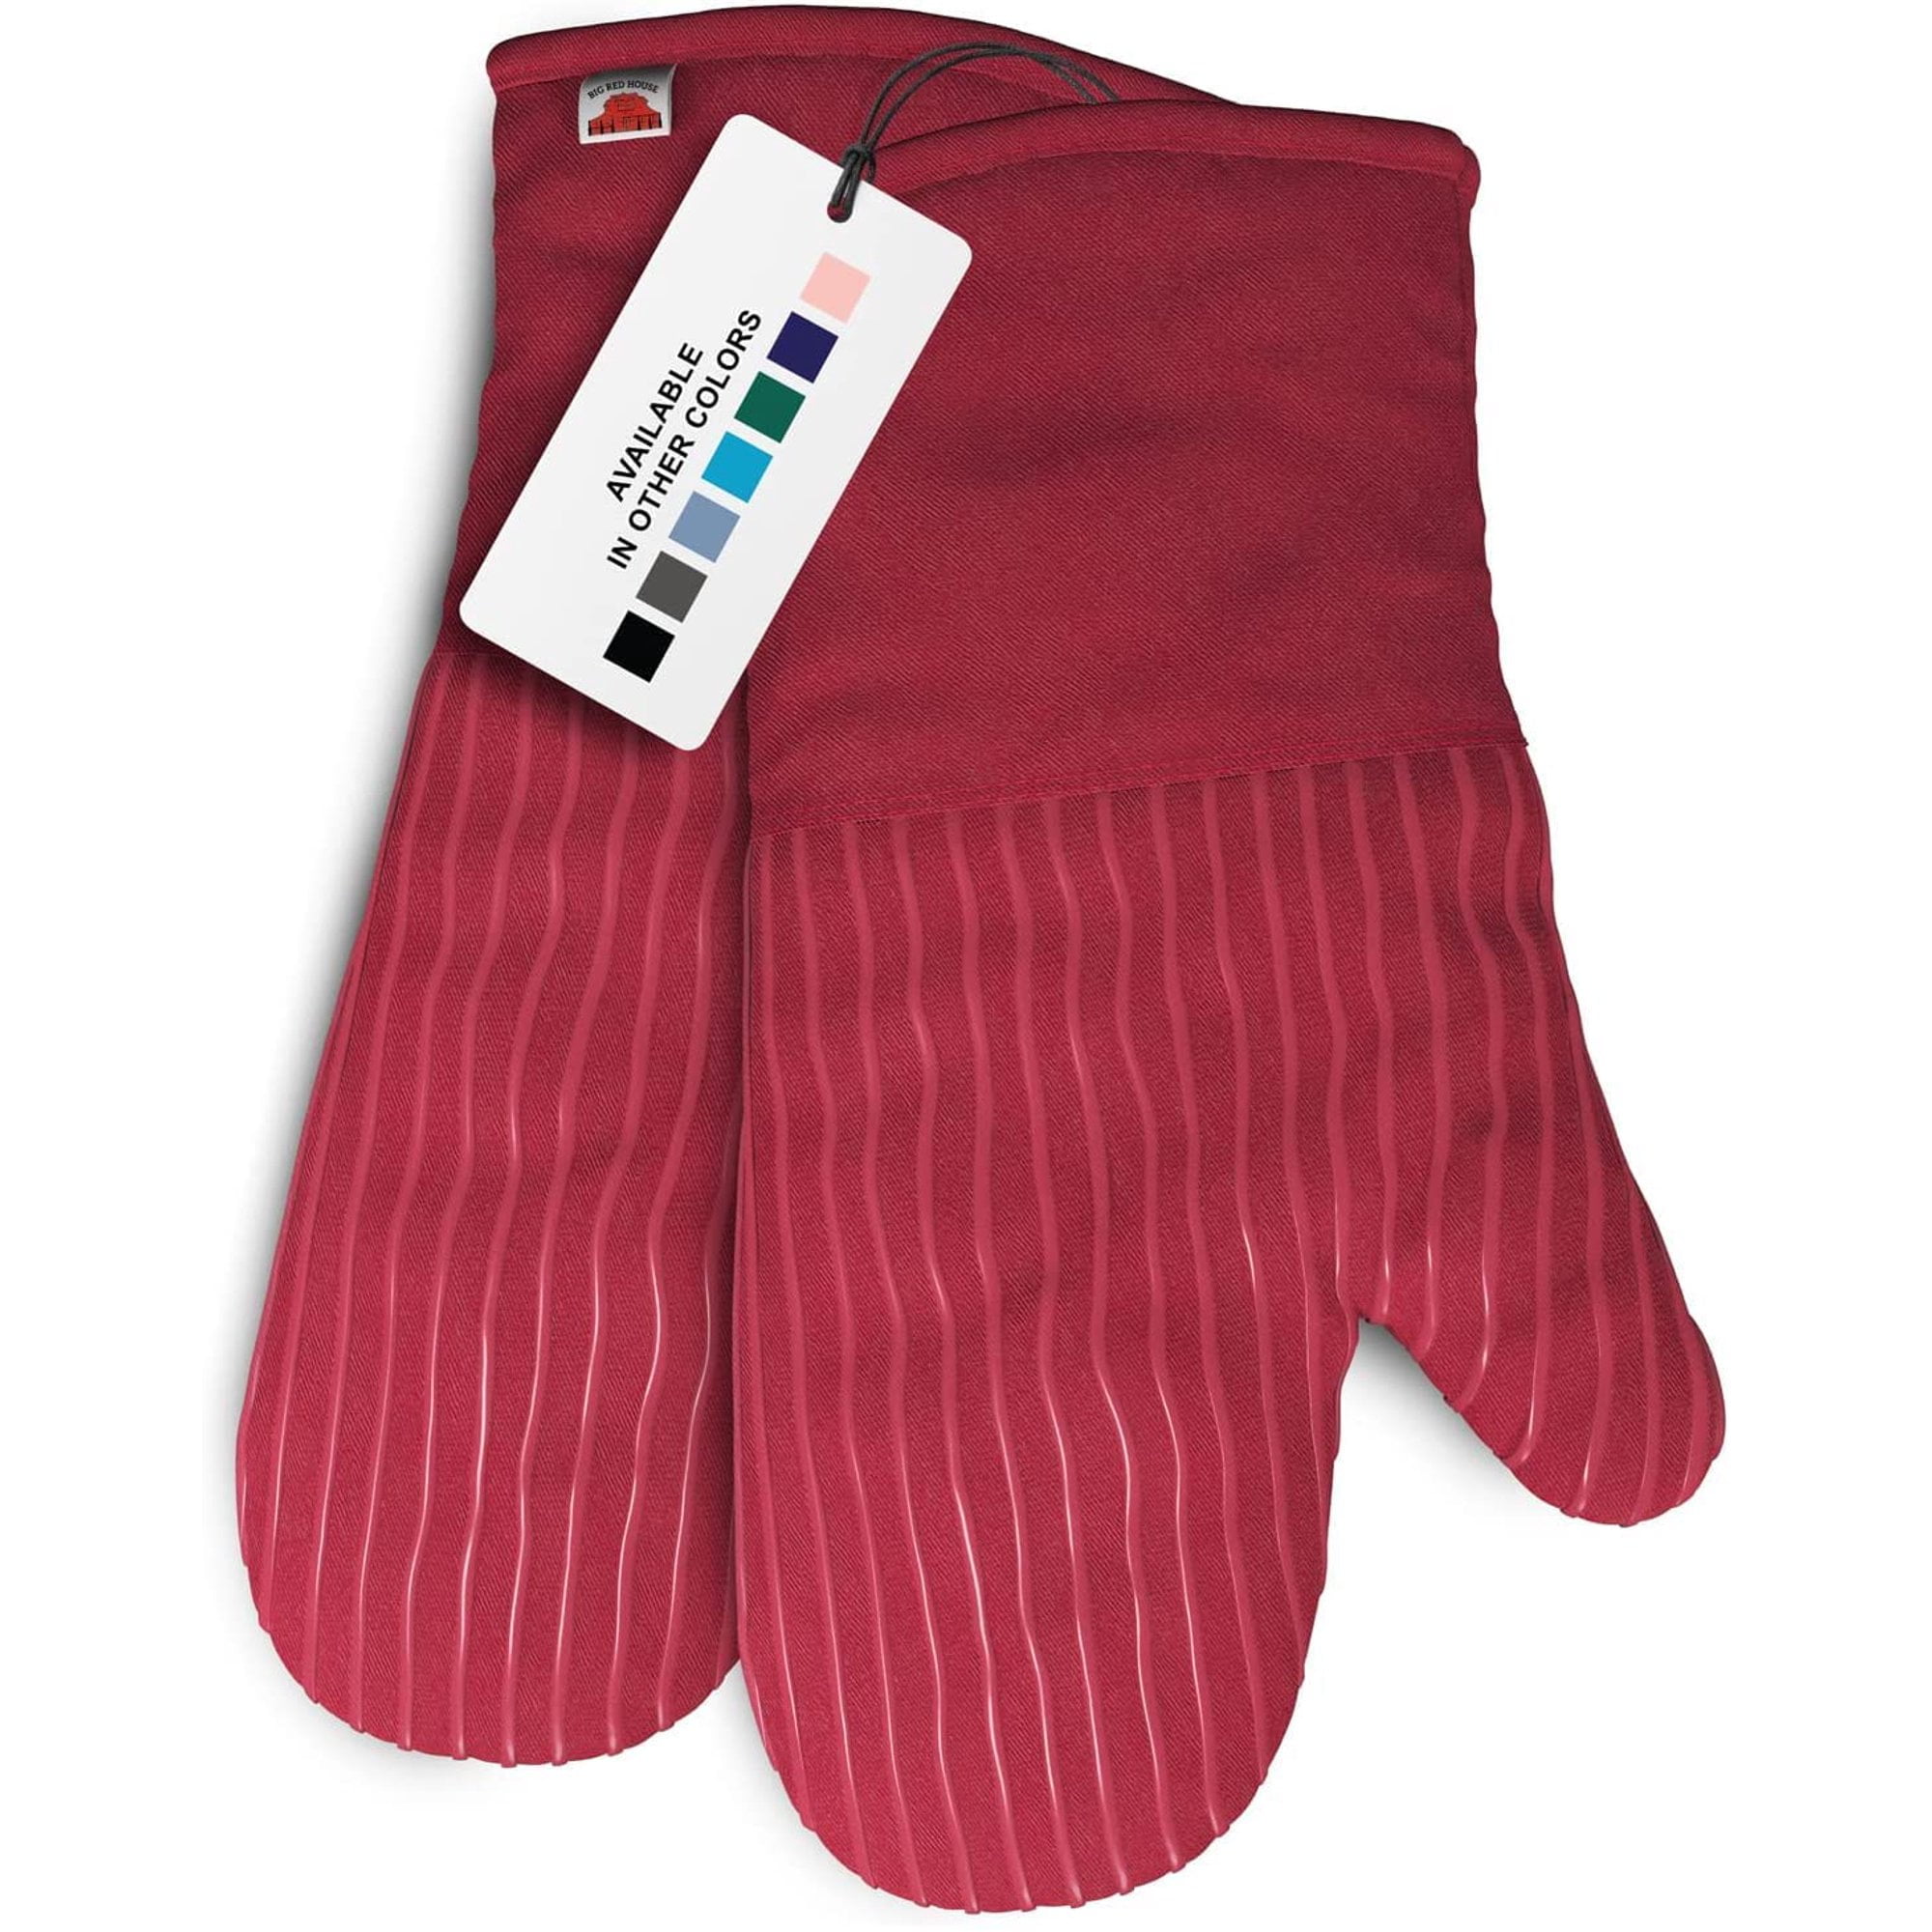 MIJOTEX Heat Resistant Silicone Oven Mitts Silicone Gloves- Set of 2 Extra Long Quilted Liner,1 Pair,12.99 inch(Red)